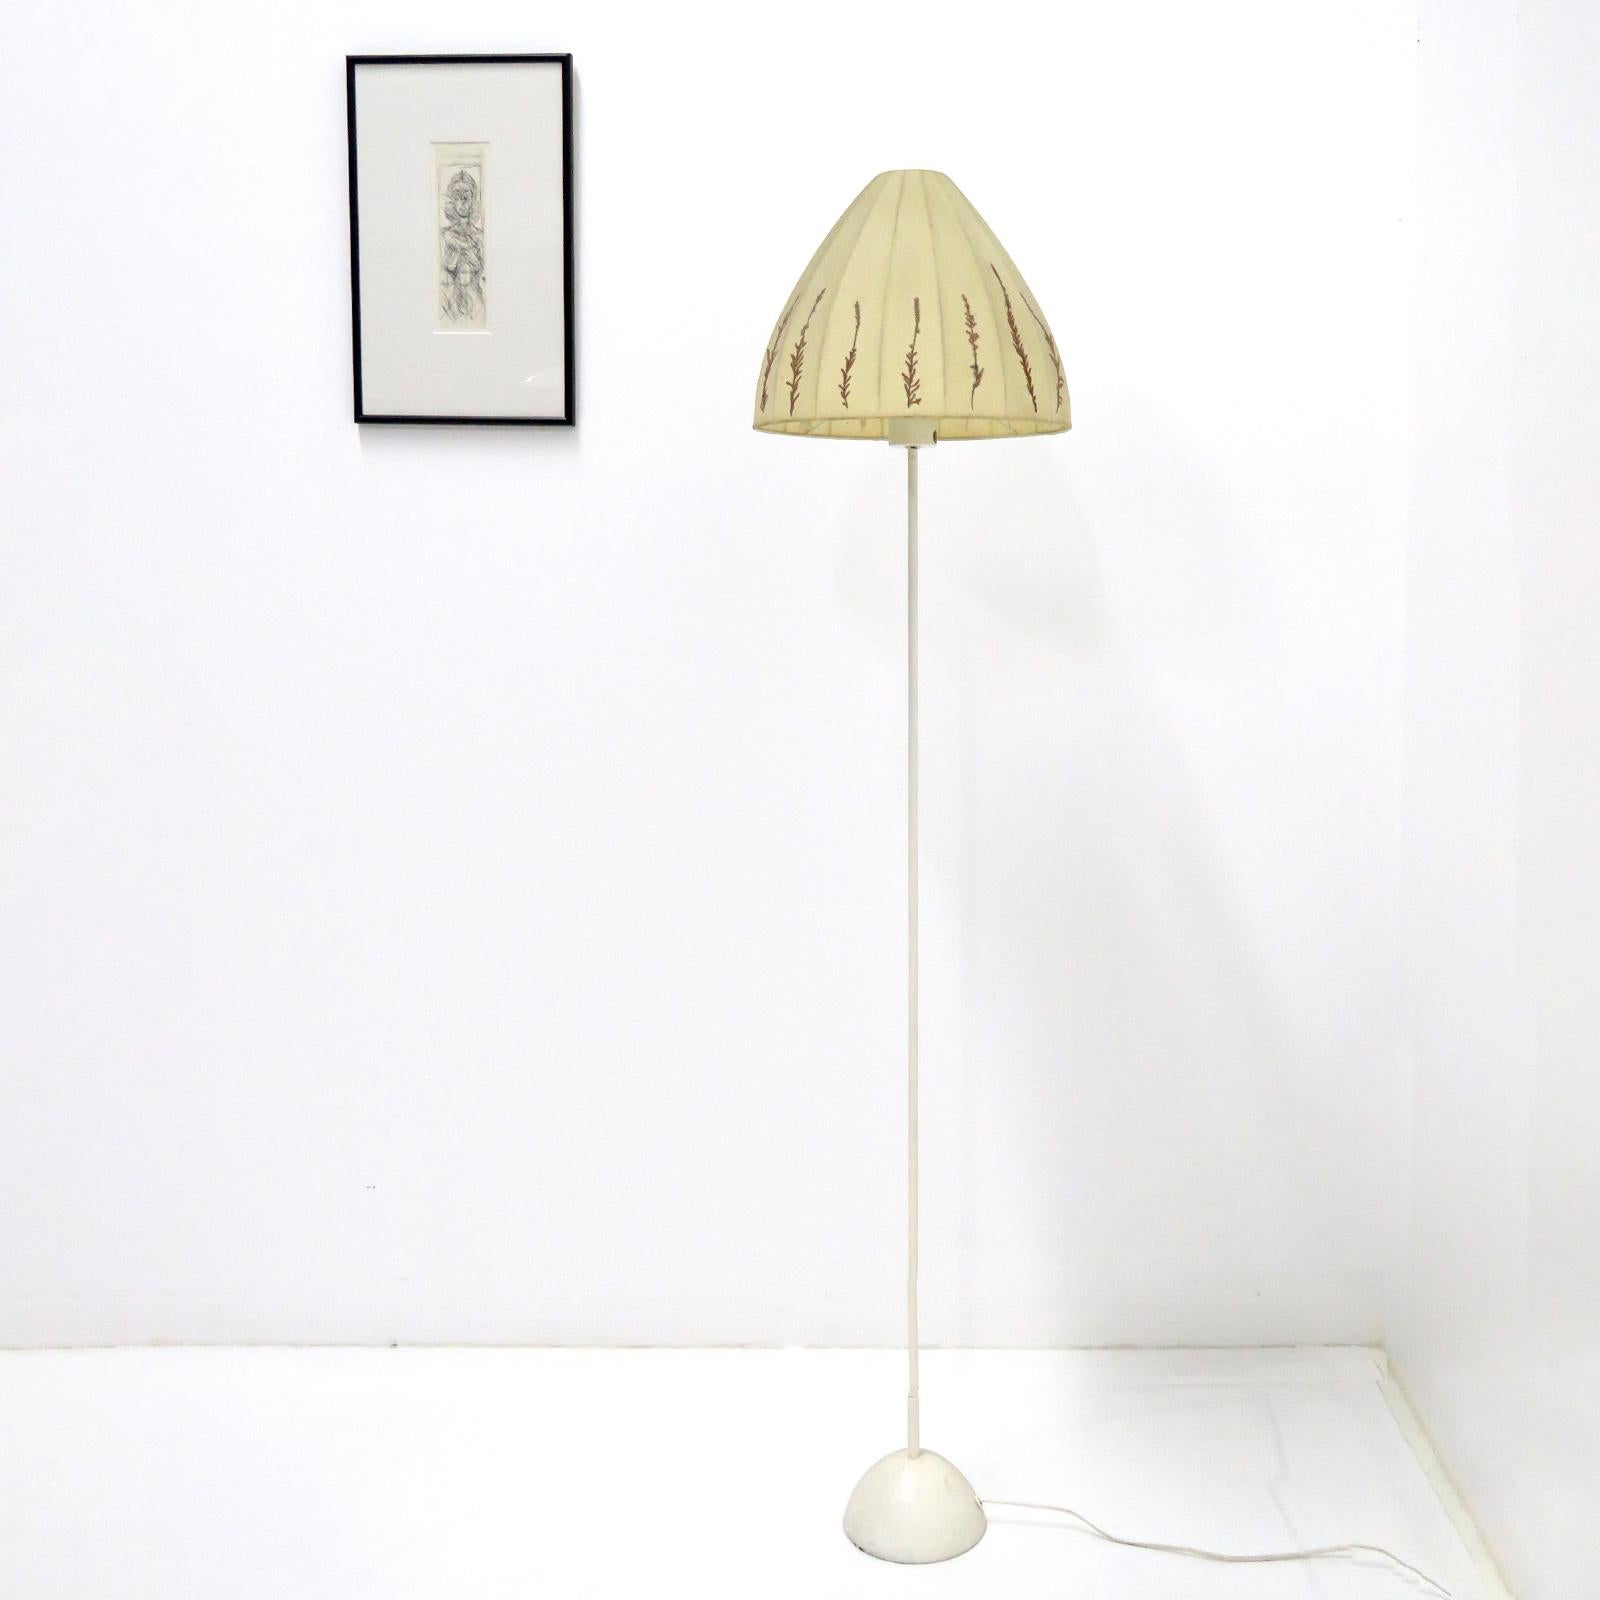 Wonderful floor lamp by Hans-Agne Jakobsson for Markaryd, Sweden, 1960, fabric shade with floral applications on an enameled metal base, wired for US standards, one E27 socket, max. wattage 75w, bulb provided as a onetime courtesy, marked with